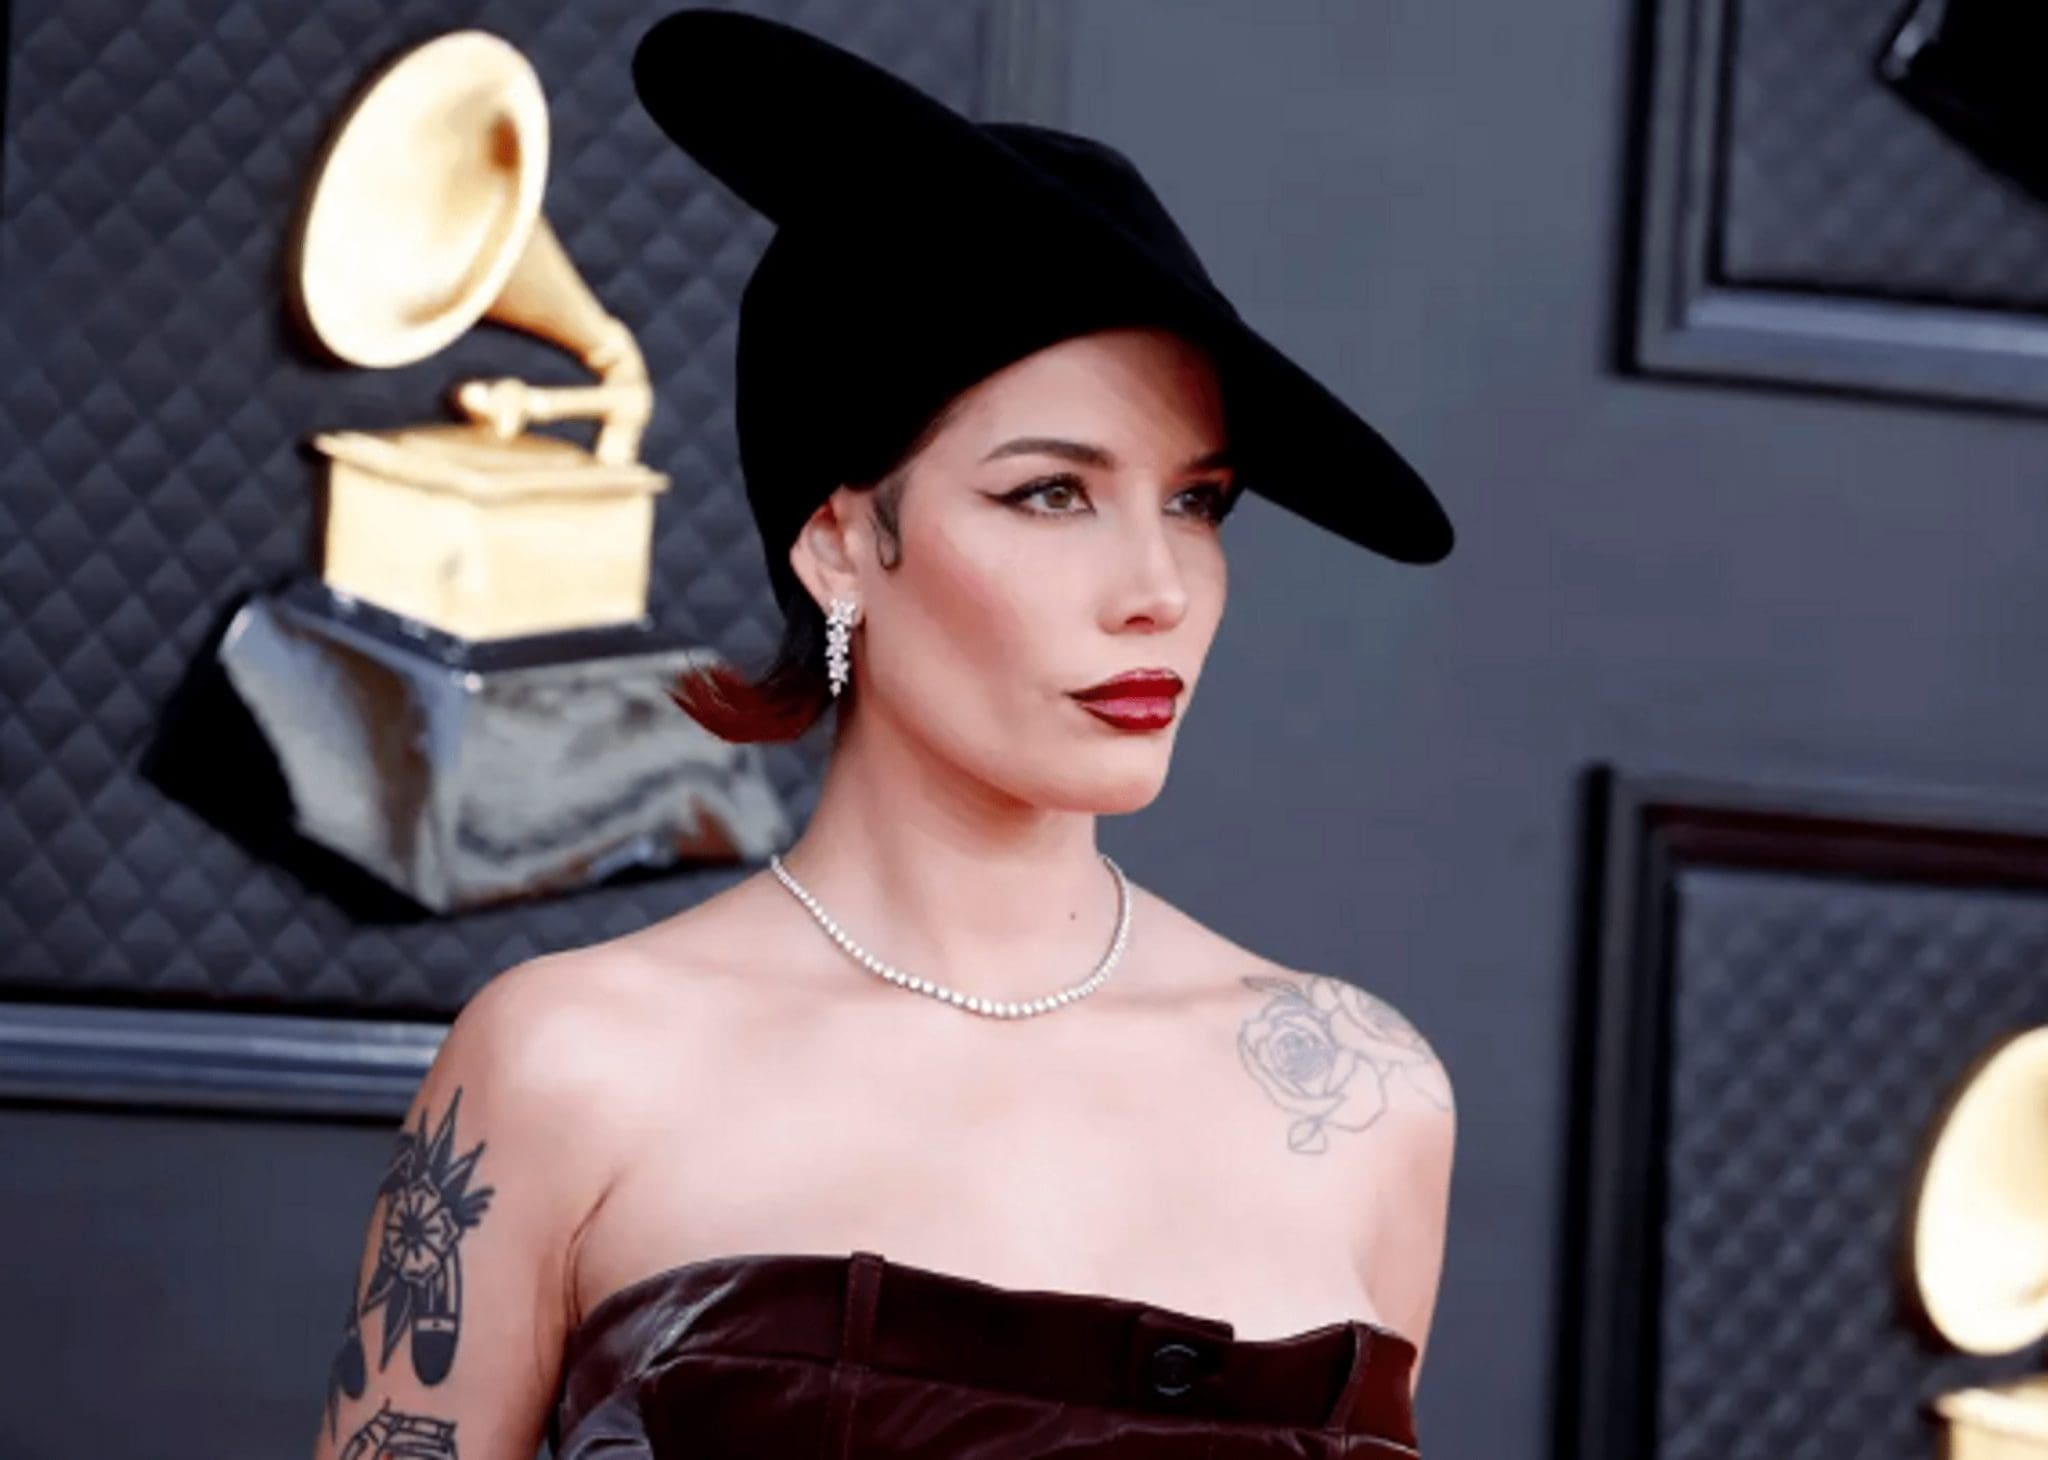 Singer Halsey admitted that by the age of twenty-five, she had managed to survive three miscarriages and one abortion